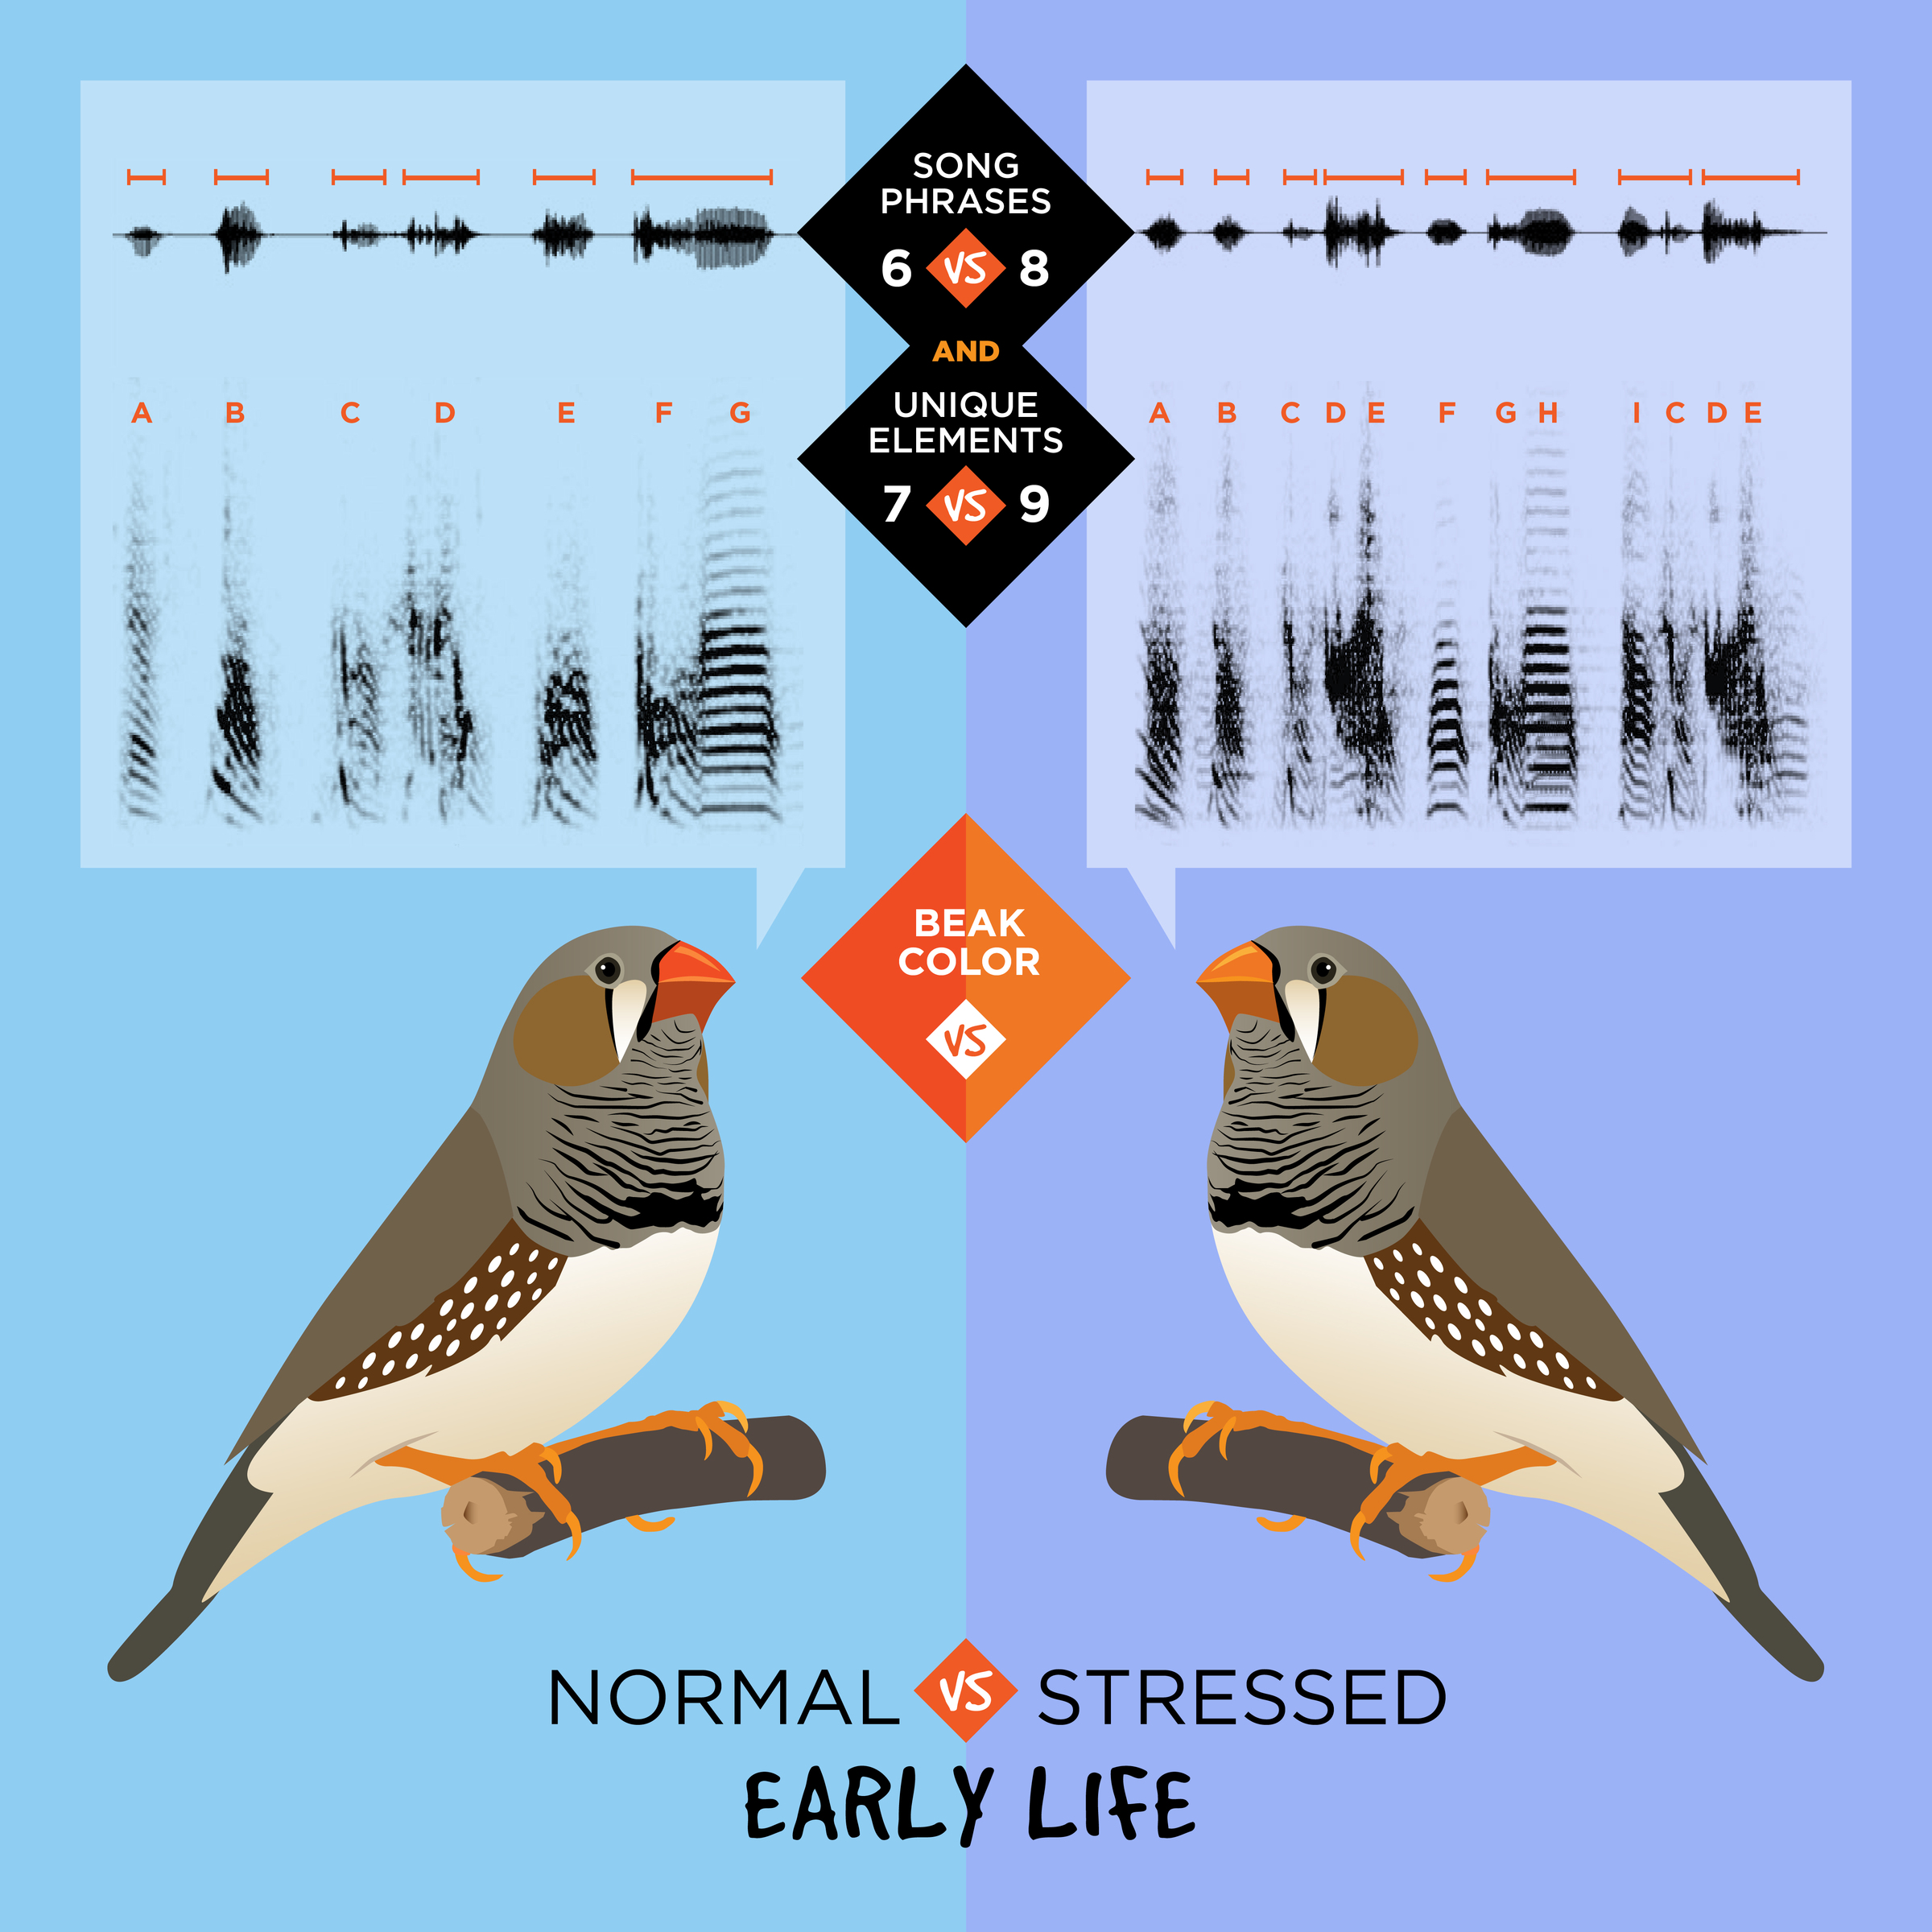 Zebra Finch Study Finds Mixed Impact Of Early Life Stress Illinois,Morgan Horse Black